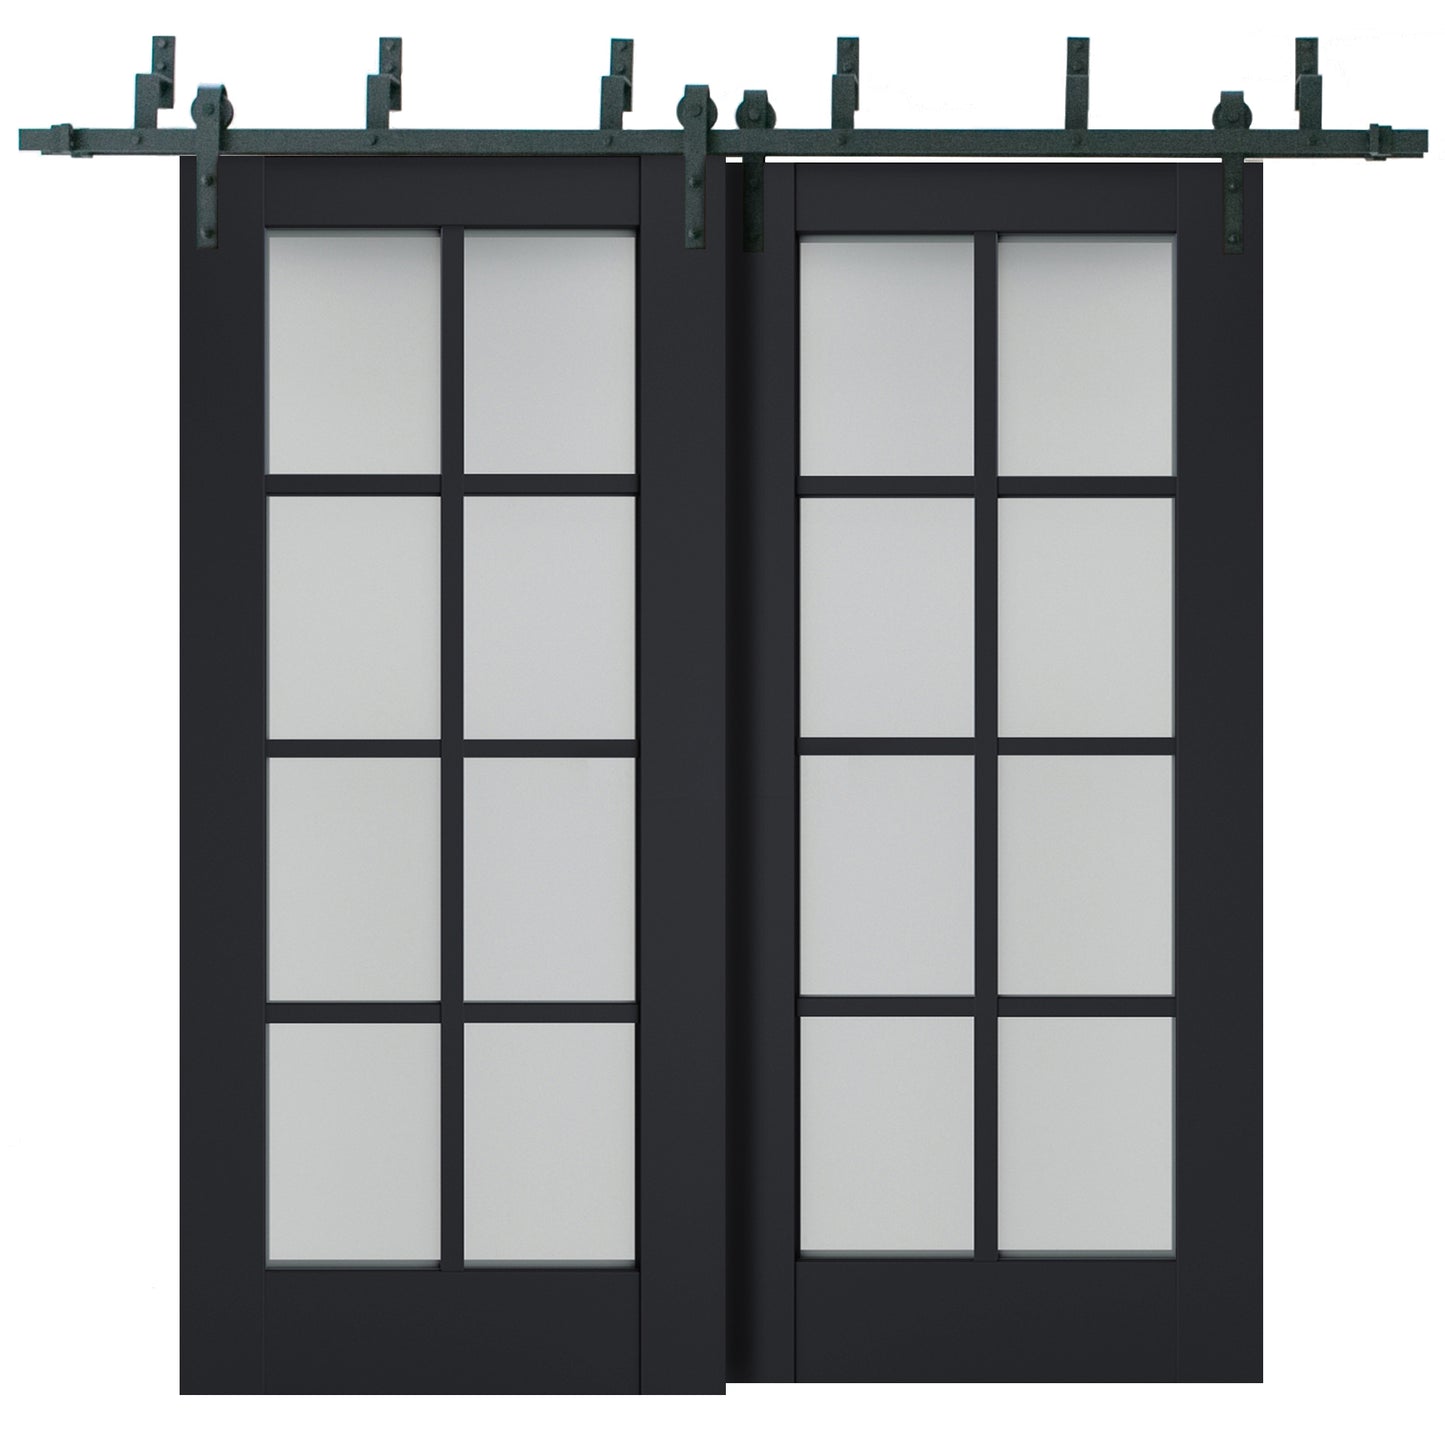 Veregio 7412 Antracite Double Barn Door with Frosted Glass and Black Bypass Rail